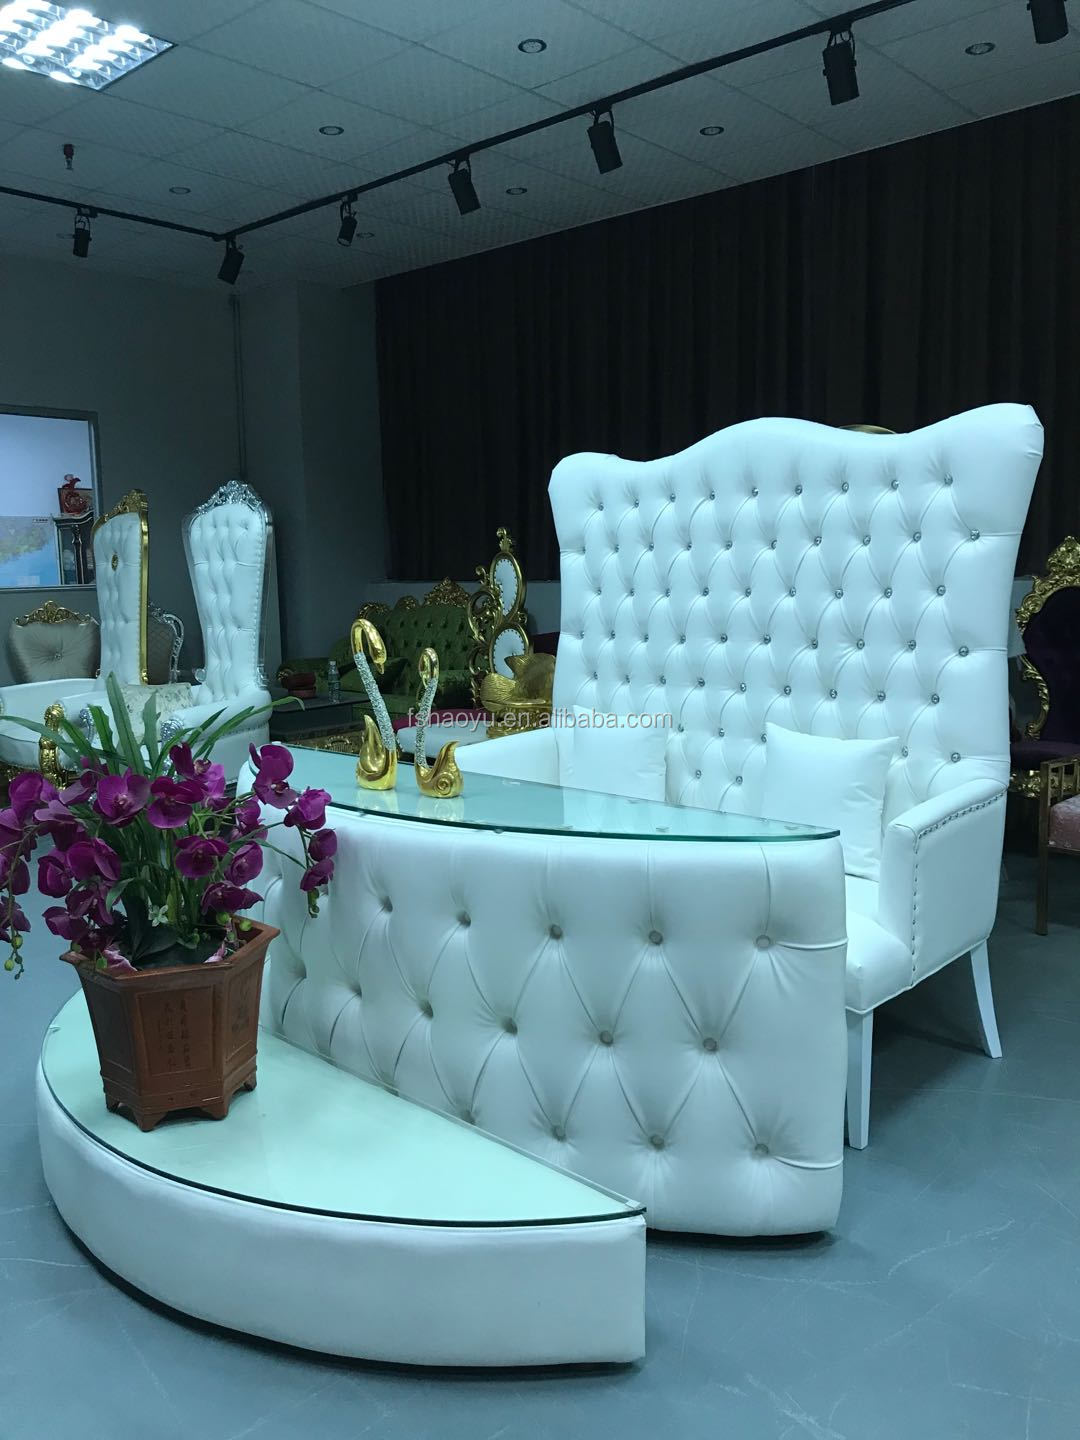 Wholesale High Back Double Throne Chair for Wedding, White and Gold Double Throne Chair Hotel Sofa Hotel Furniture 5 Set Antique